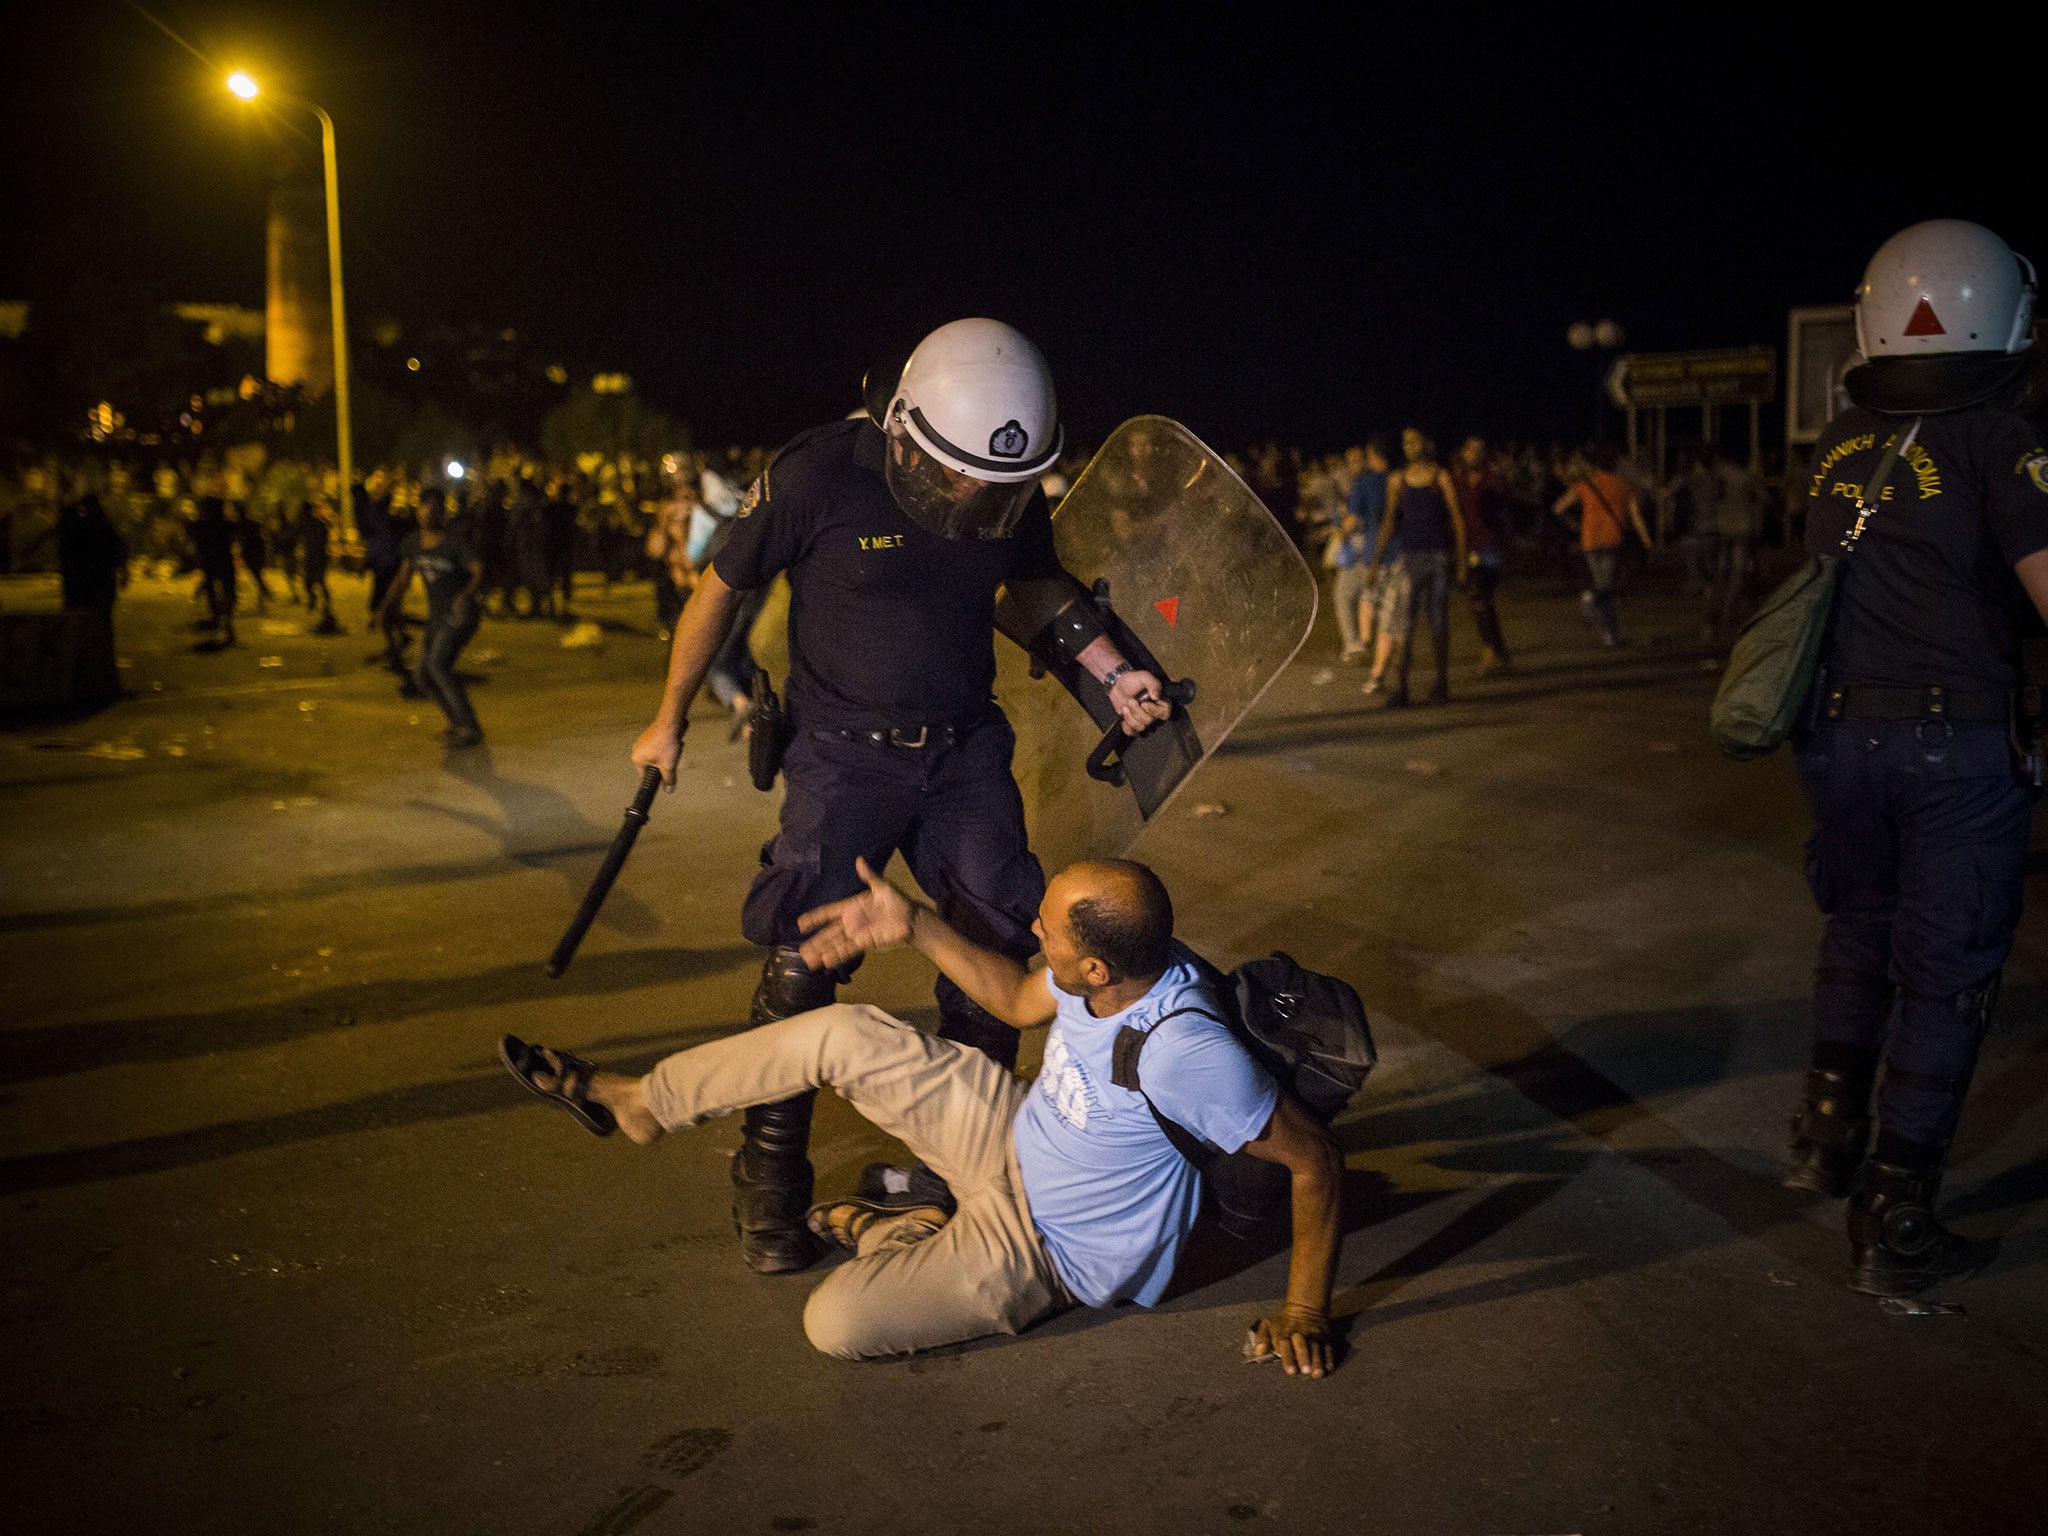 A migrant is confronted by a riot office during protests on the Greek island of lesbos on Saturday night, 5 September